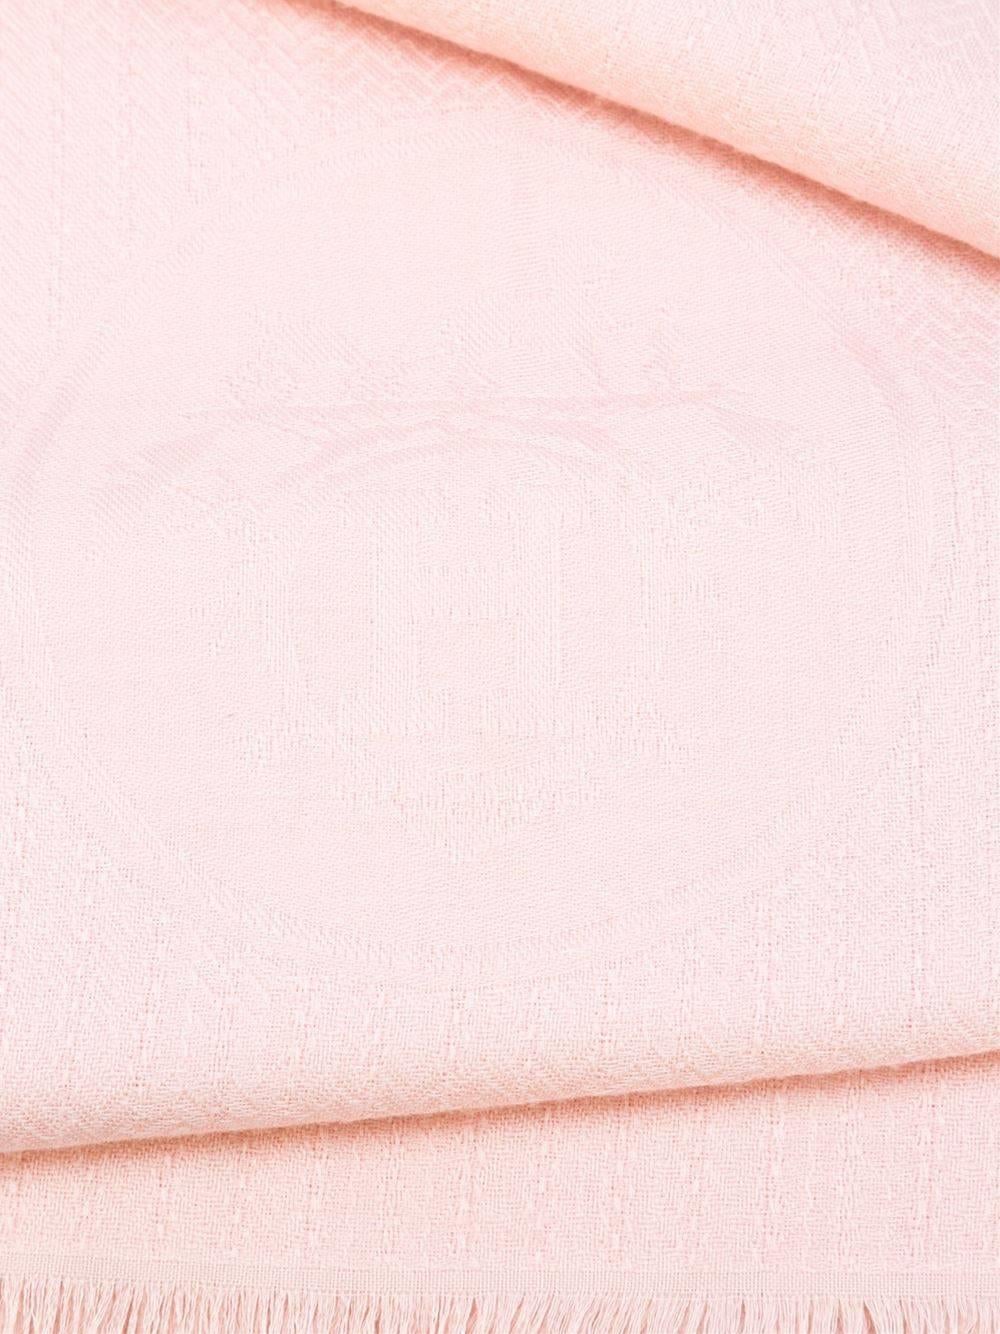 Hermes pink pastel  shawl. Made of cashmere-silk. Circa : 1990

Marked : H - Made in France 

Size : 212 x 66 cm

Excellent condition. As new. 